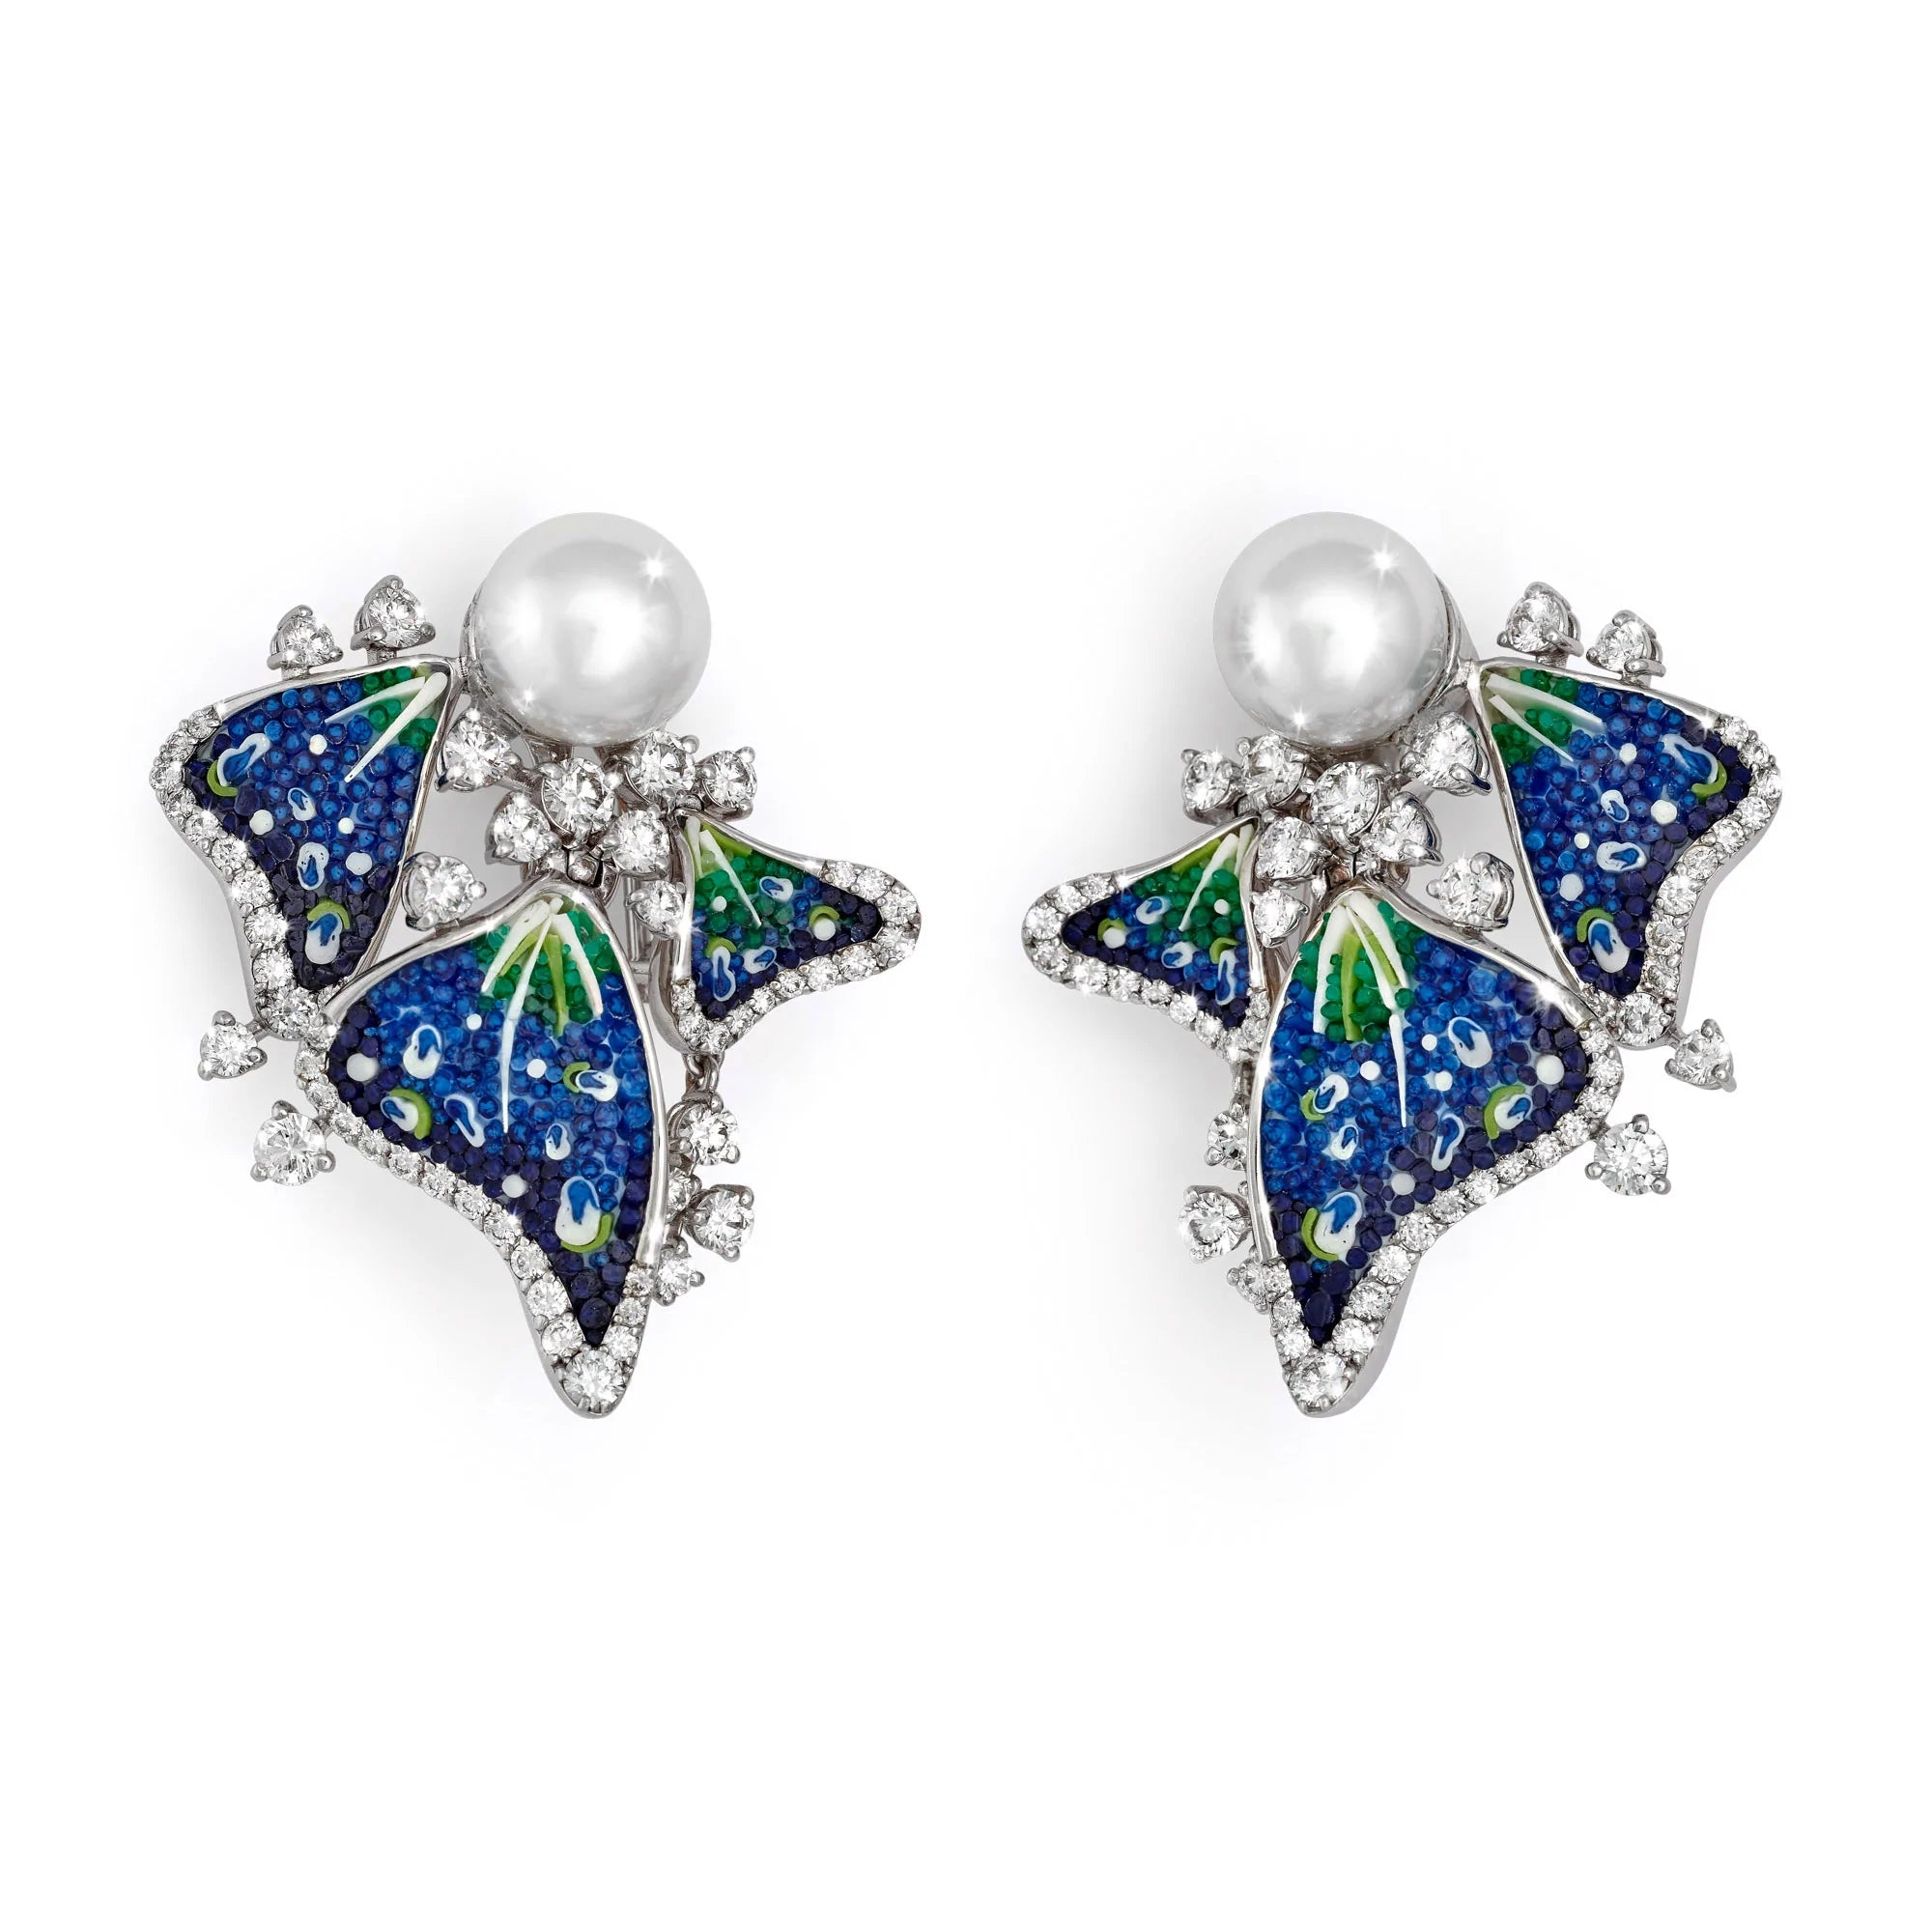 Earrings made of white gold, with micromosaic, diamonds and South Sea pearls